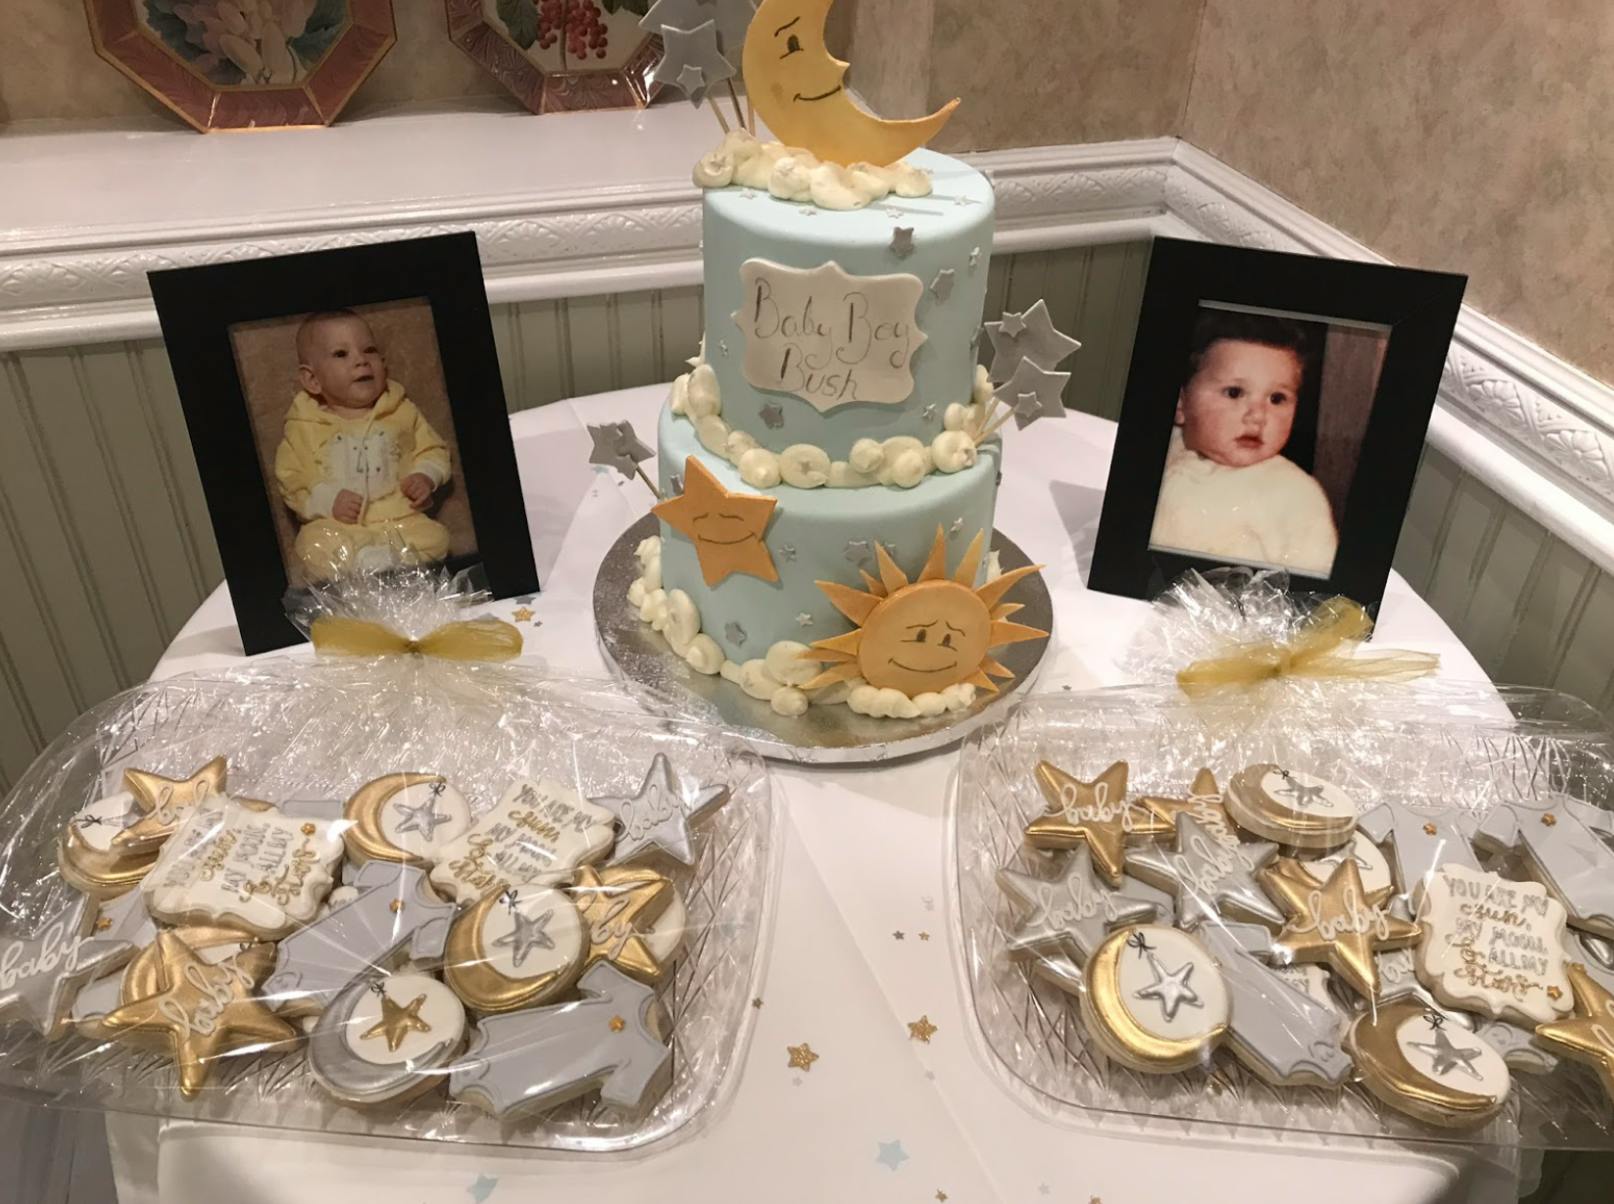 A table with cookies, cake, and photos of babies. 